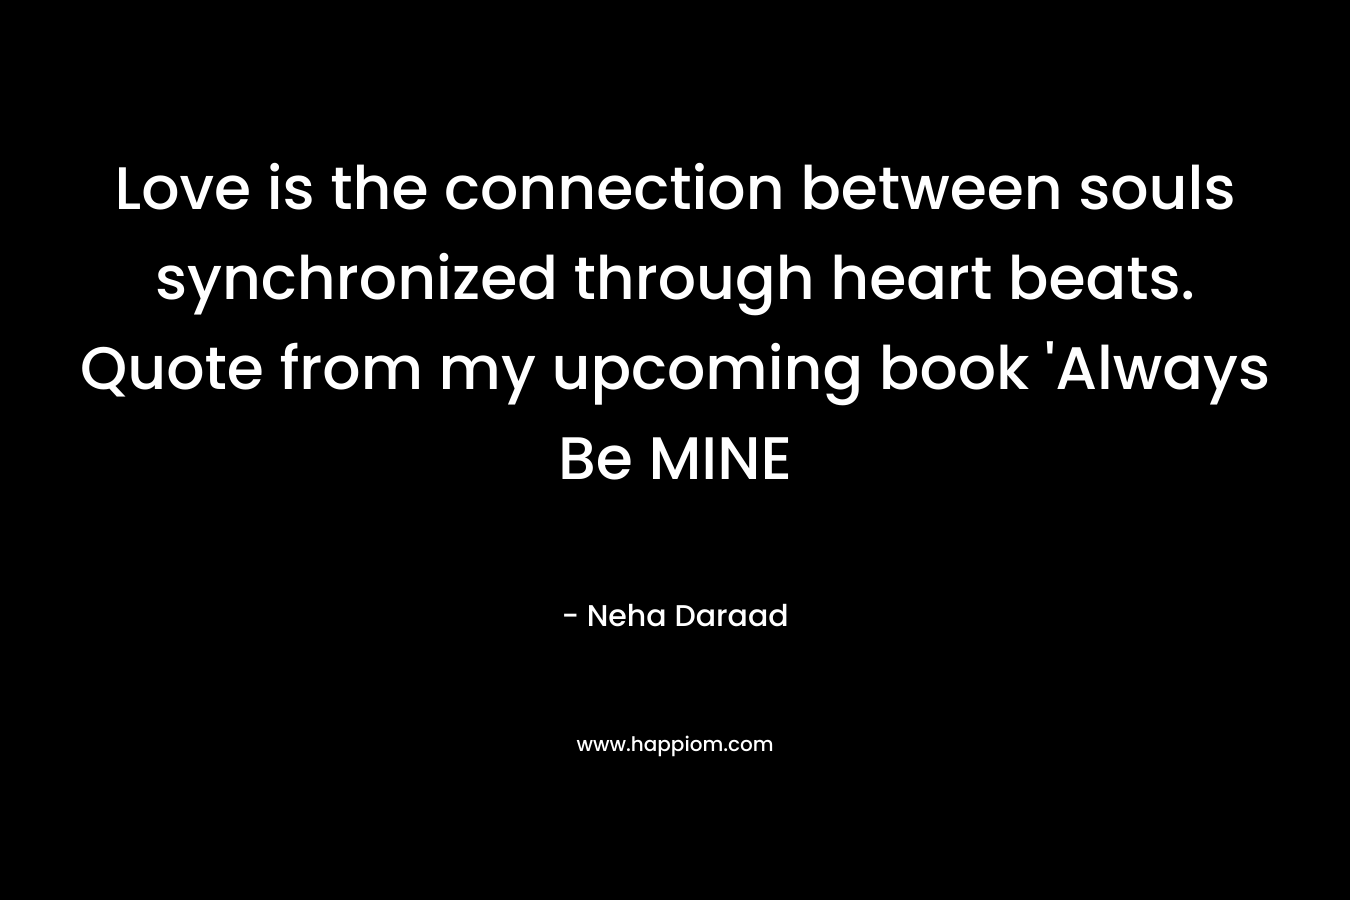 Love is the connection between souls synchronized through heart beats. Quote from my upcoming book 'Always Be MINE